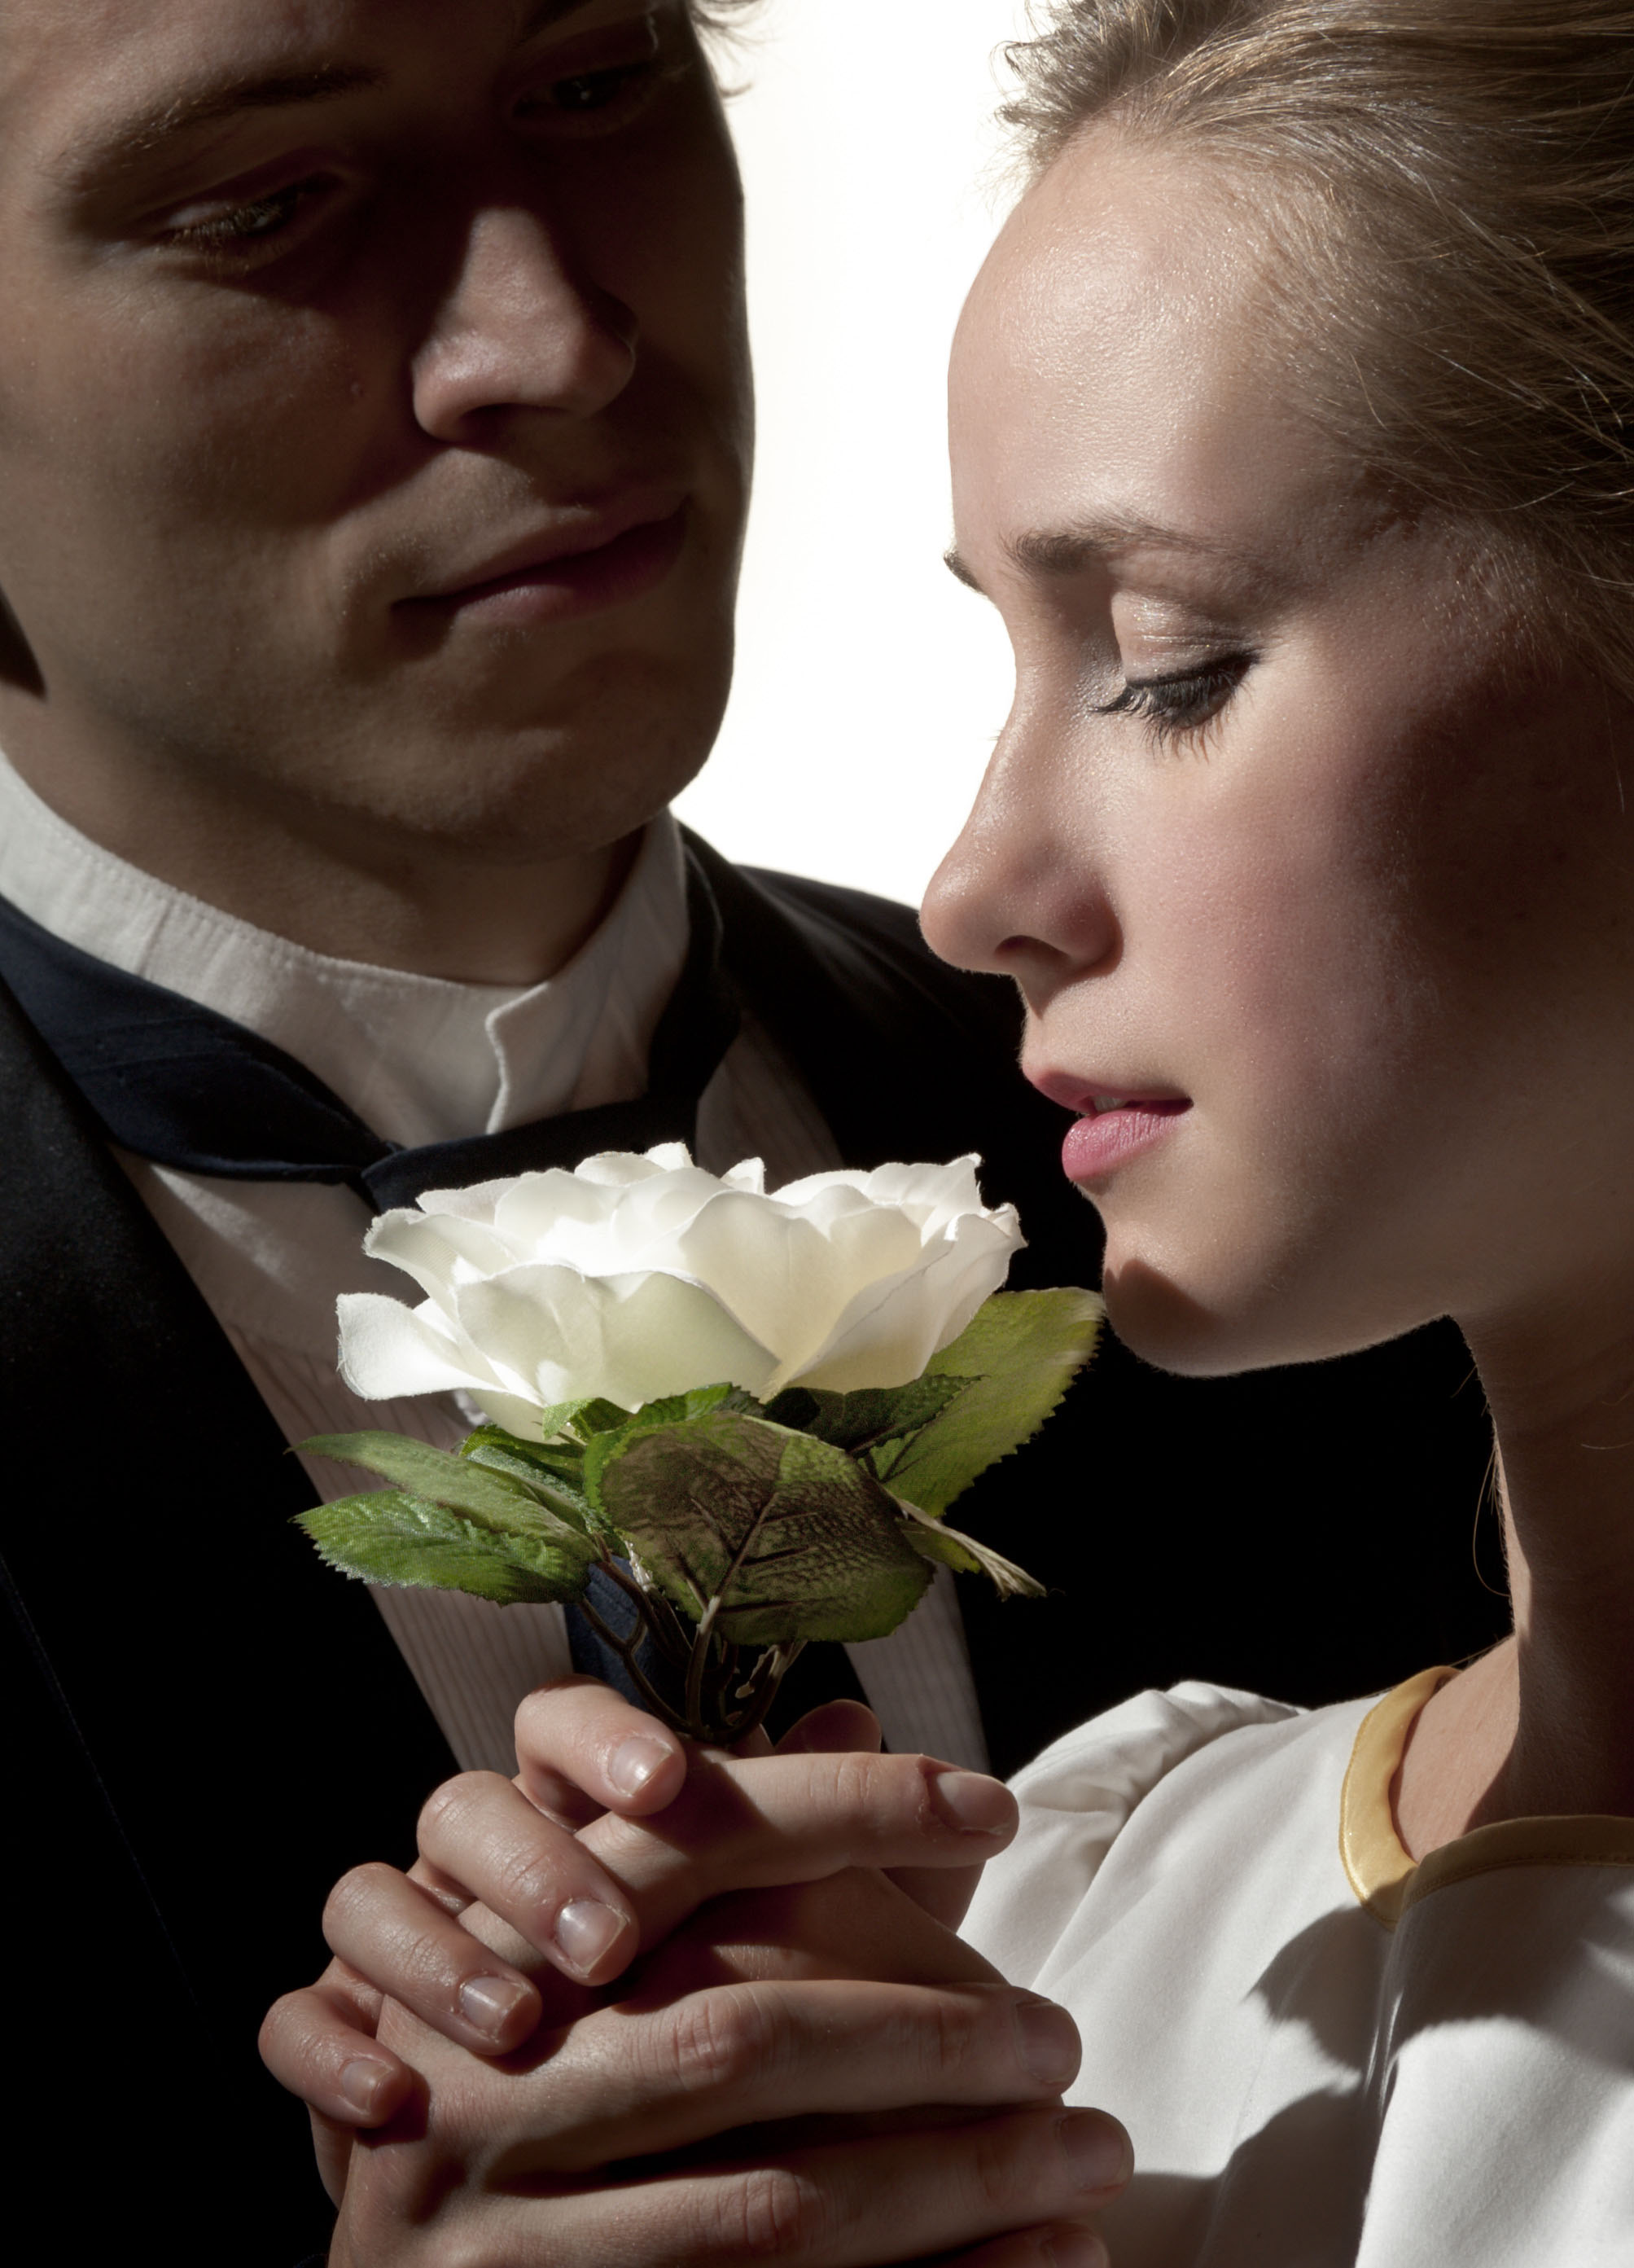 Woman smelling a flower that a man is handing her. 